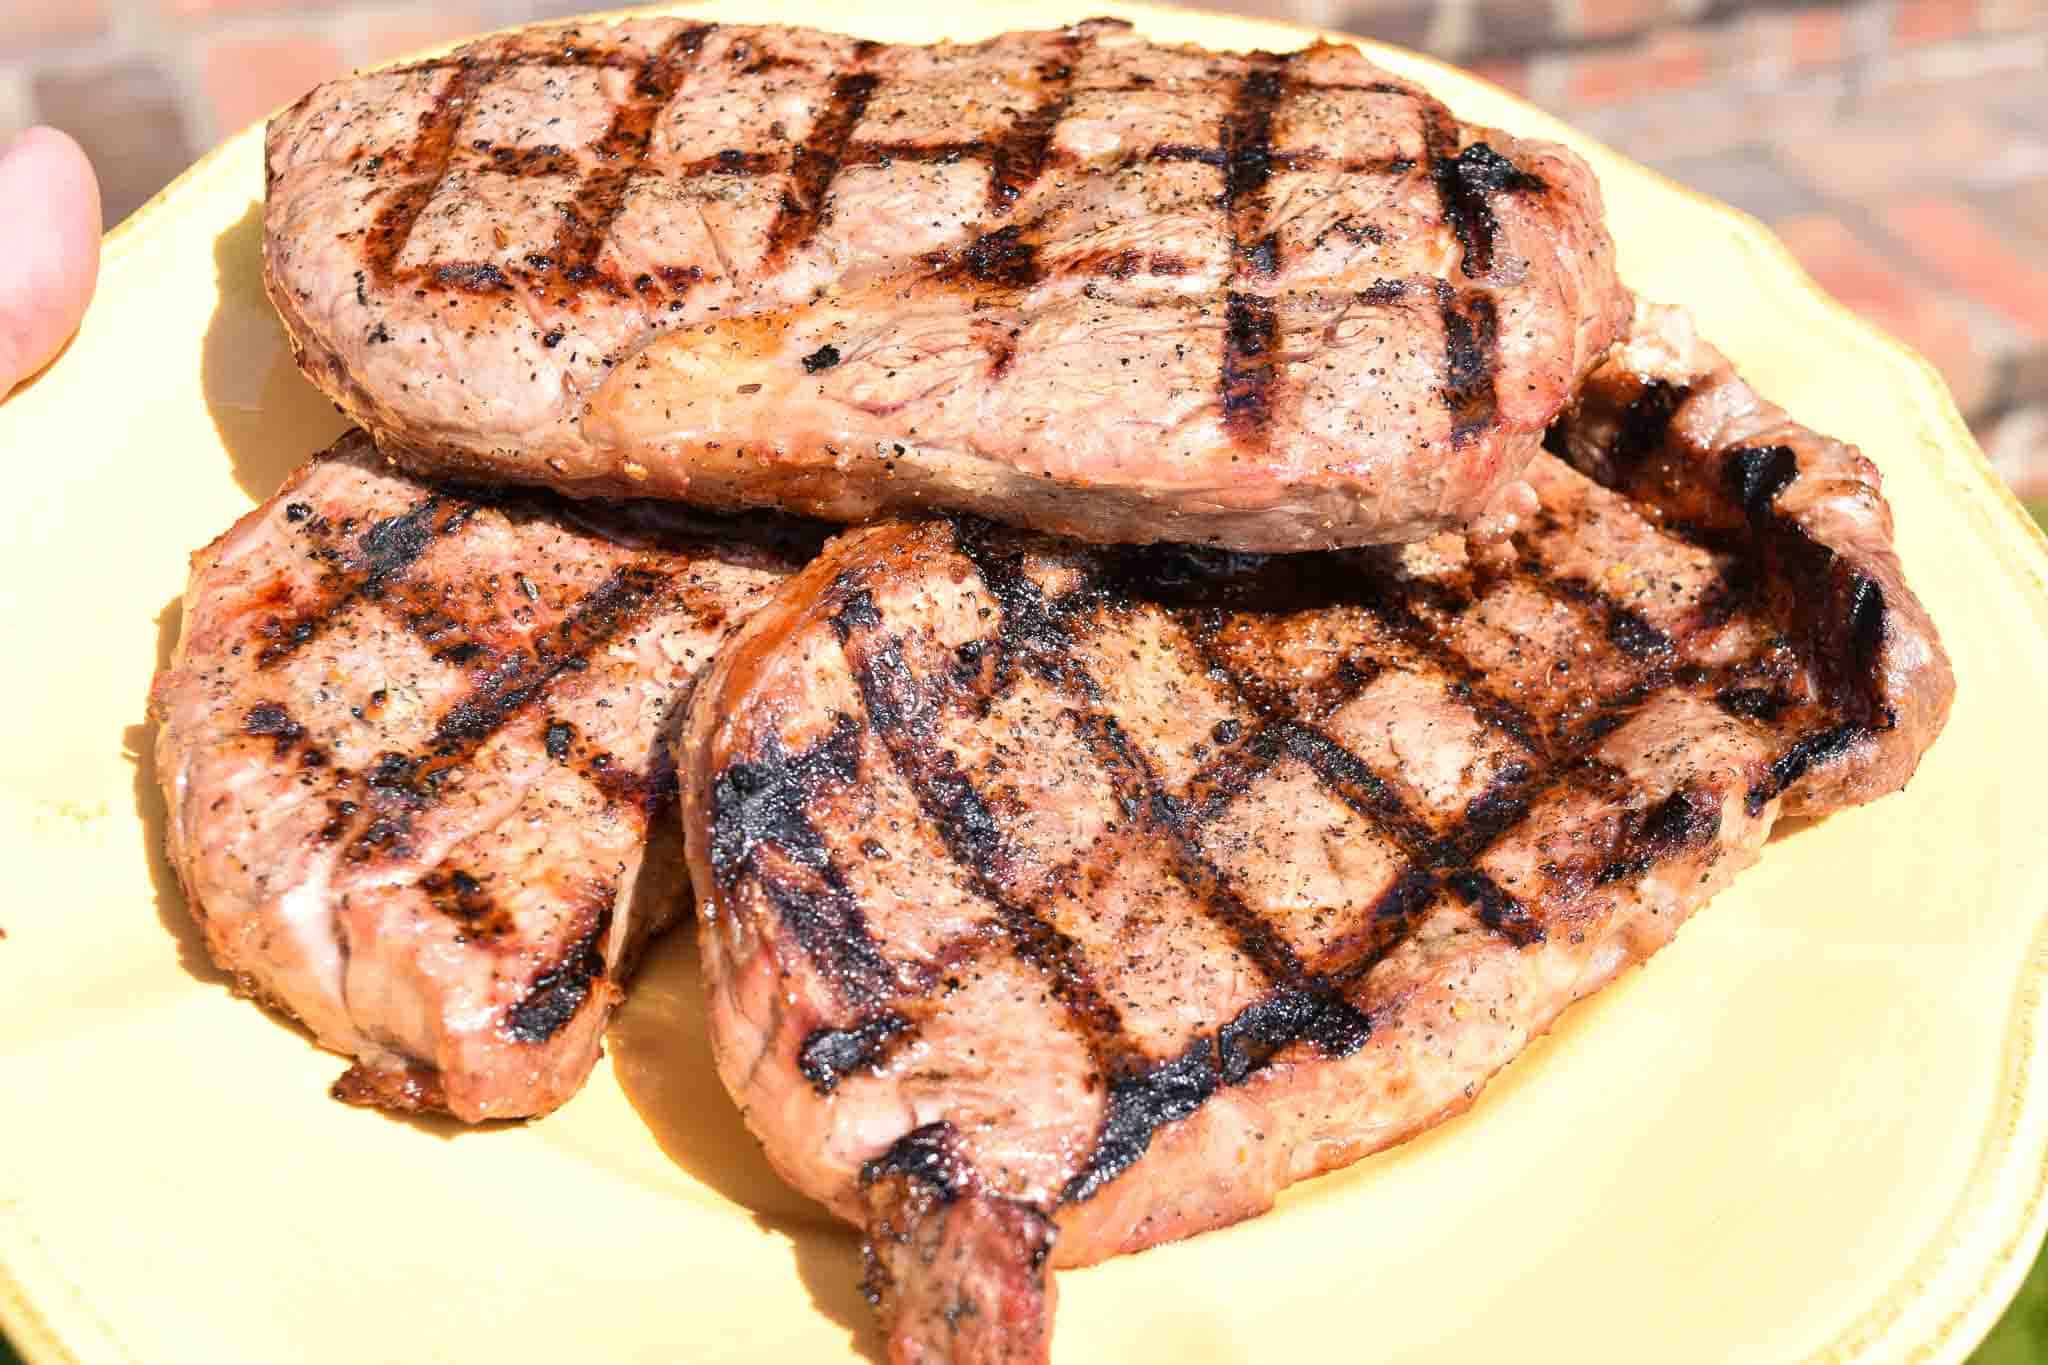 Steaks stacked up on yellow plate ready to be served